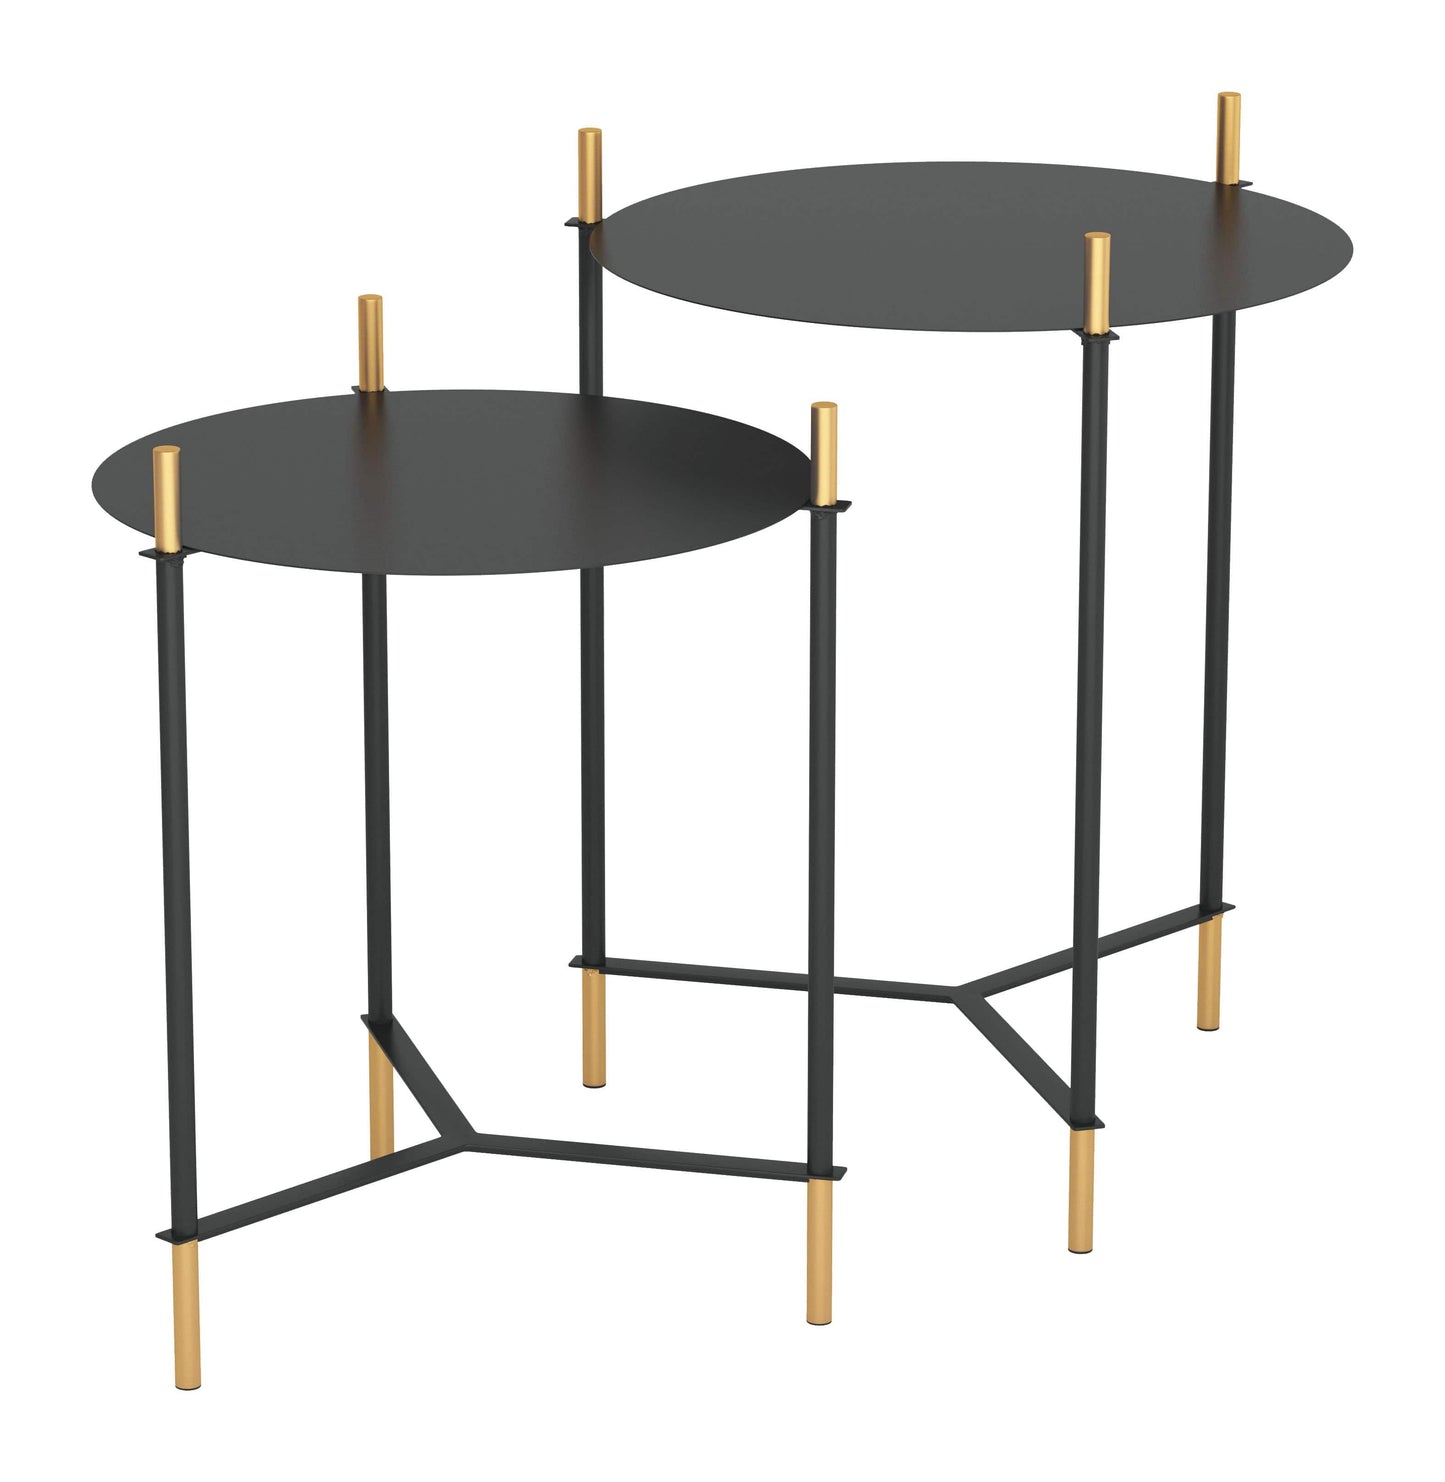 Tables can slide together since the heights vary